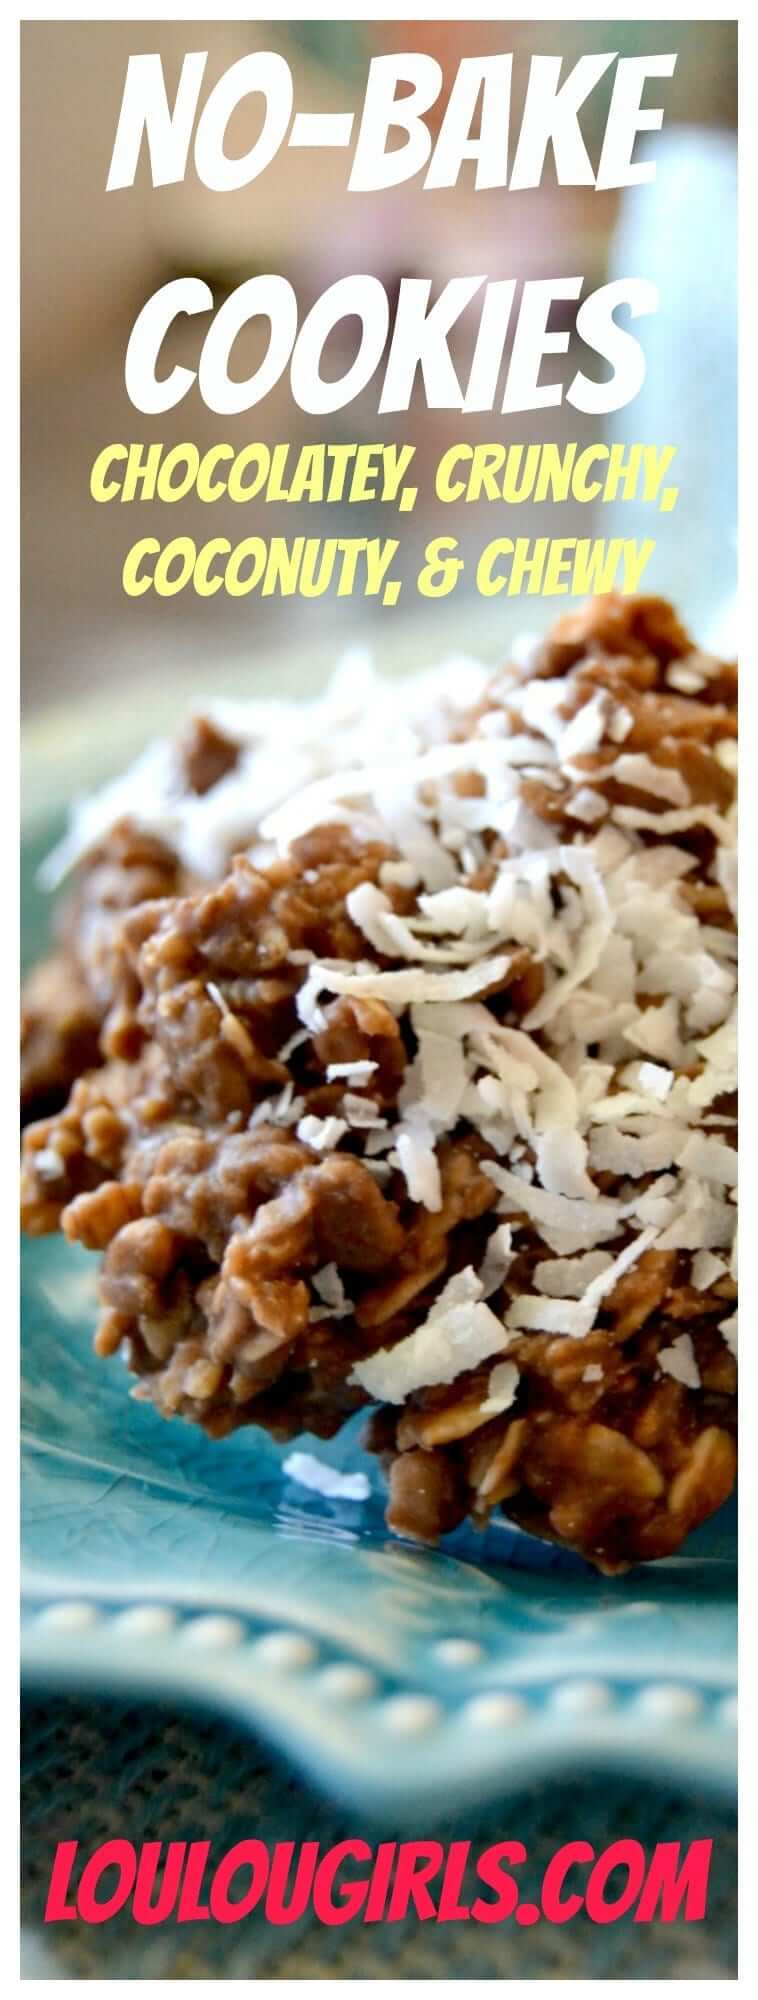 no-bake-cookies-chocolate-chewy-crunchy-peanut-butter-oatmeal-coconut-chocolate